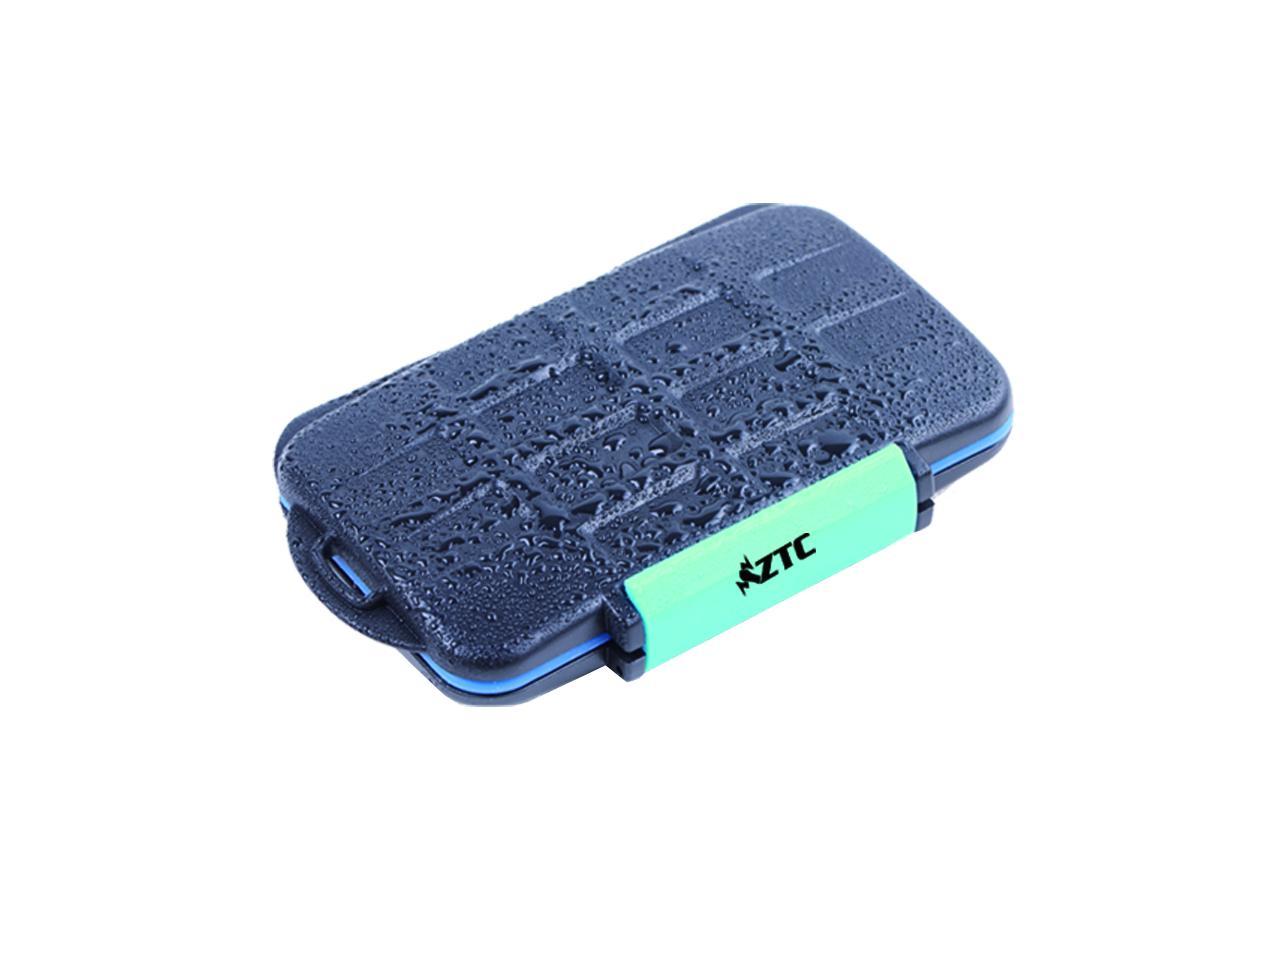 ZTC Micro Card Travel Case 4 x Micro 2 x SDHC 2 x CF Cards Rugged Water and shock proof. Floats if Dropped in The Water Model ZTC-CAS001